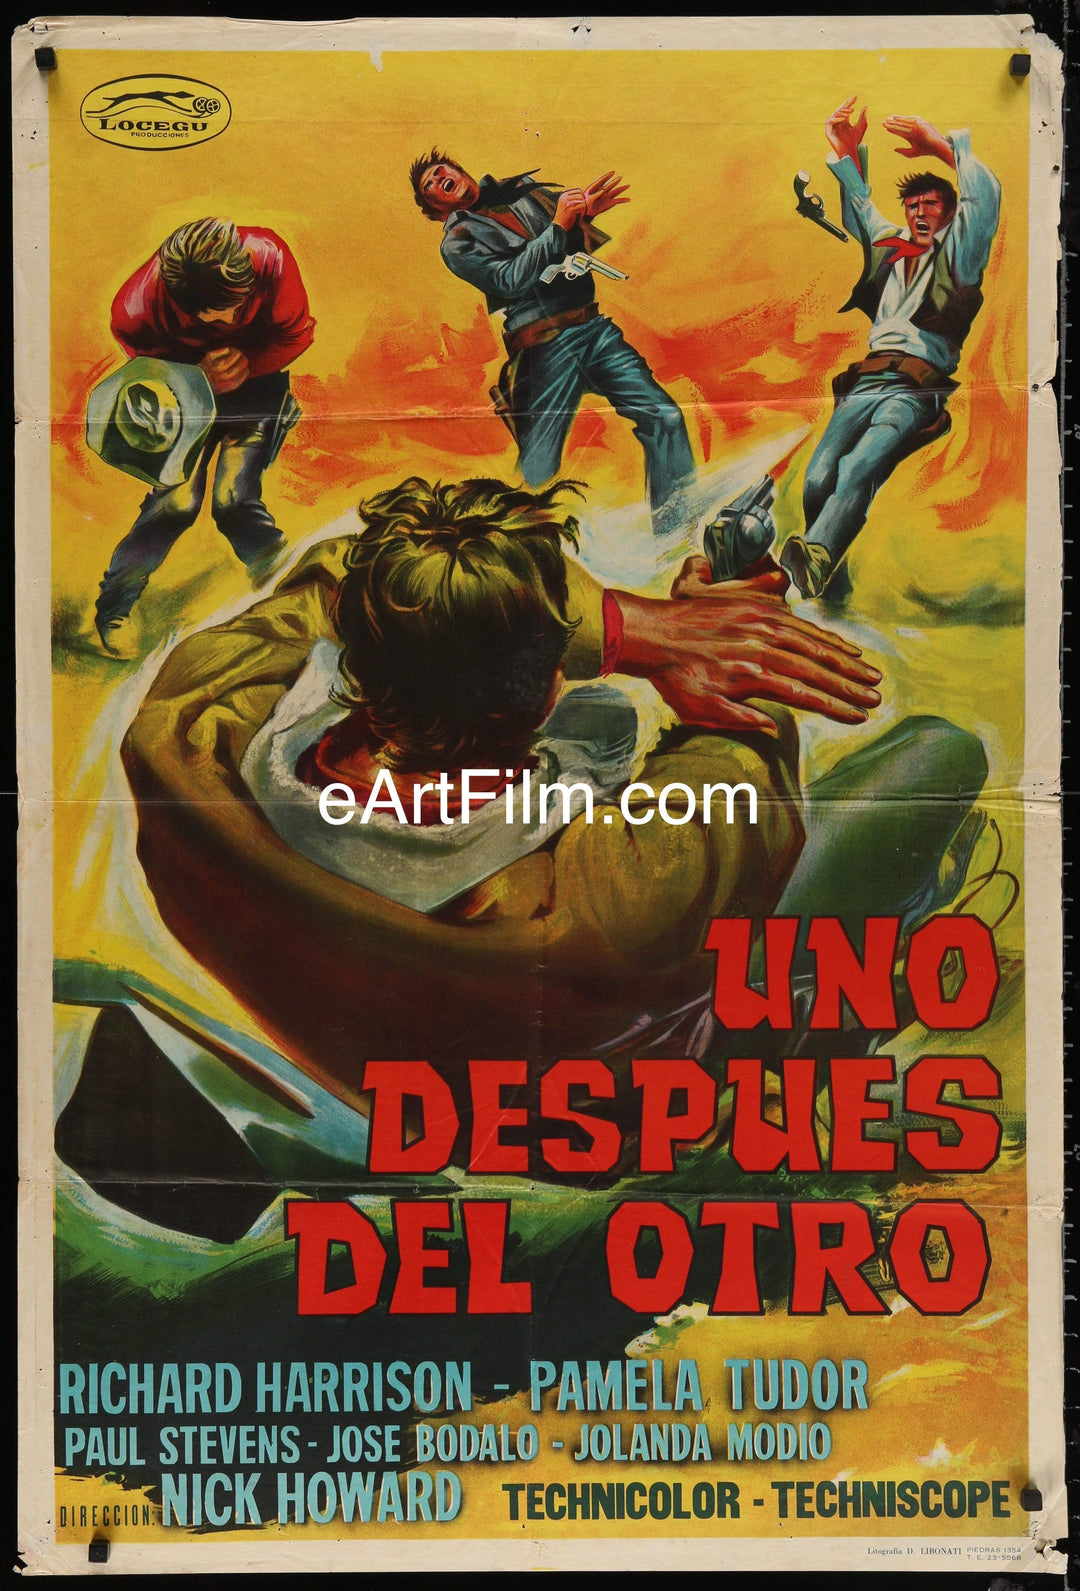 eArtFilm.com Argentina (28"x43") One After Another aka Uno dopo l'altro 1968 28x43 vintage spaghetti western art